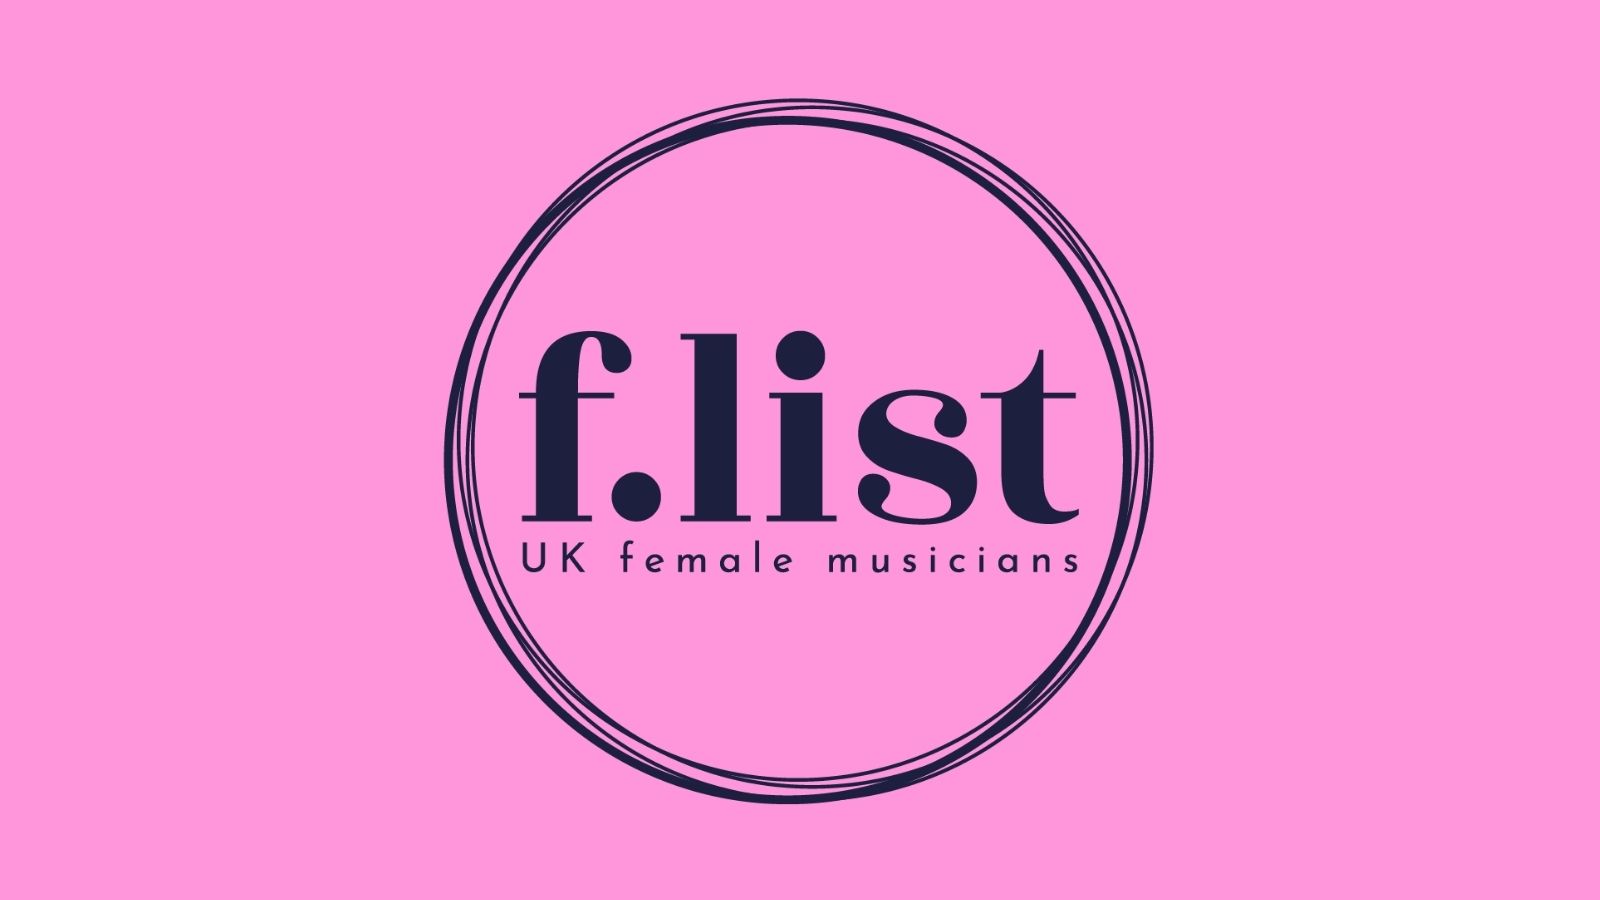 The F-List UK Directory for Female Musicians